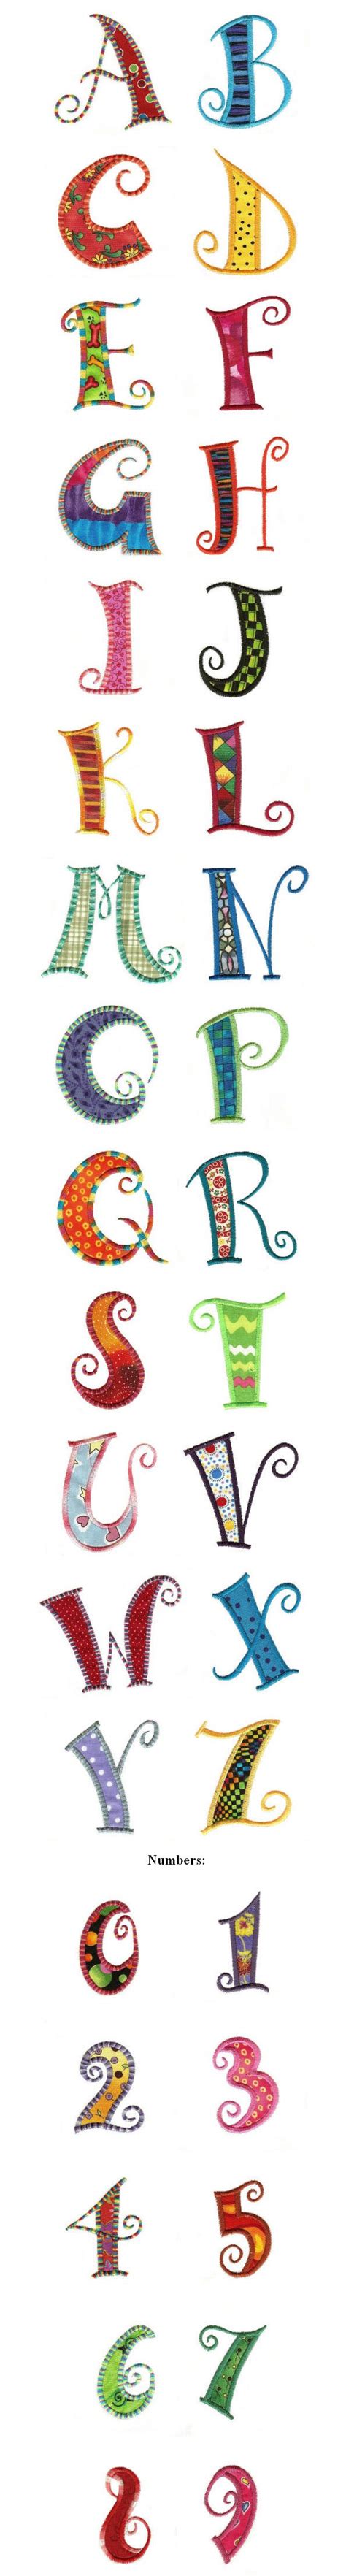 Curly Q Alphabet Doodle Lettering Creative Lettering Lettering Styles